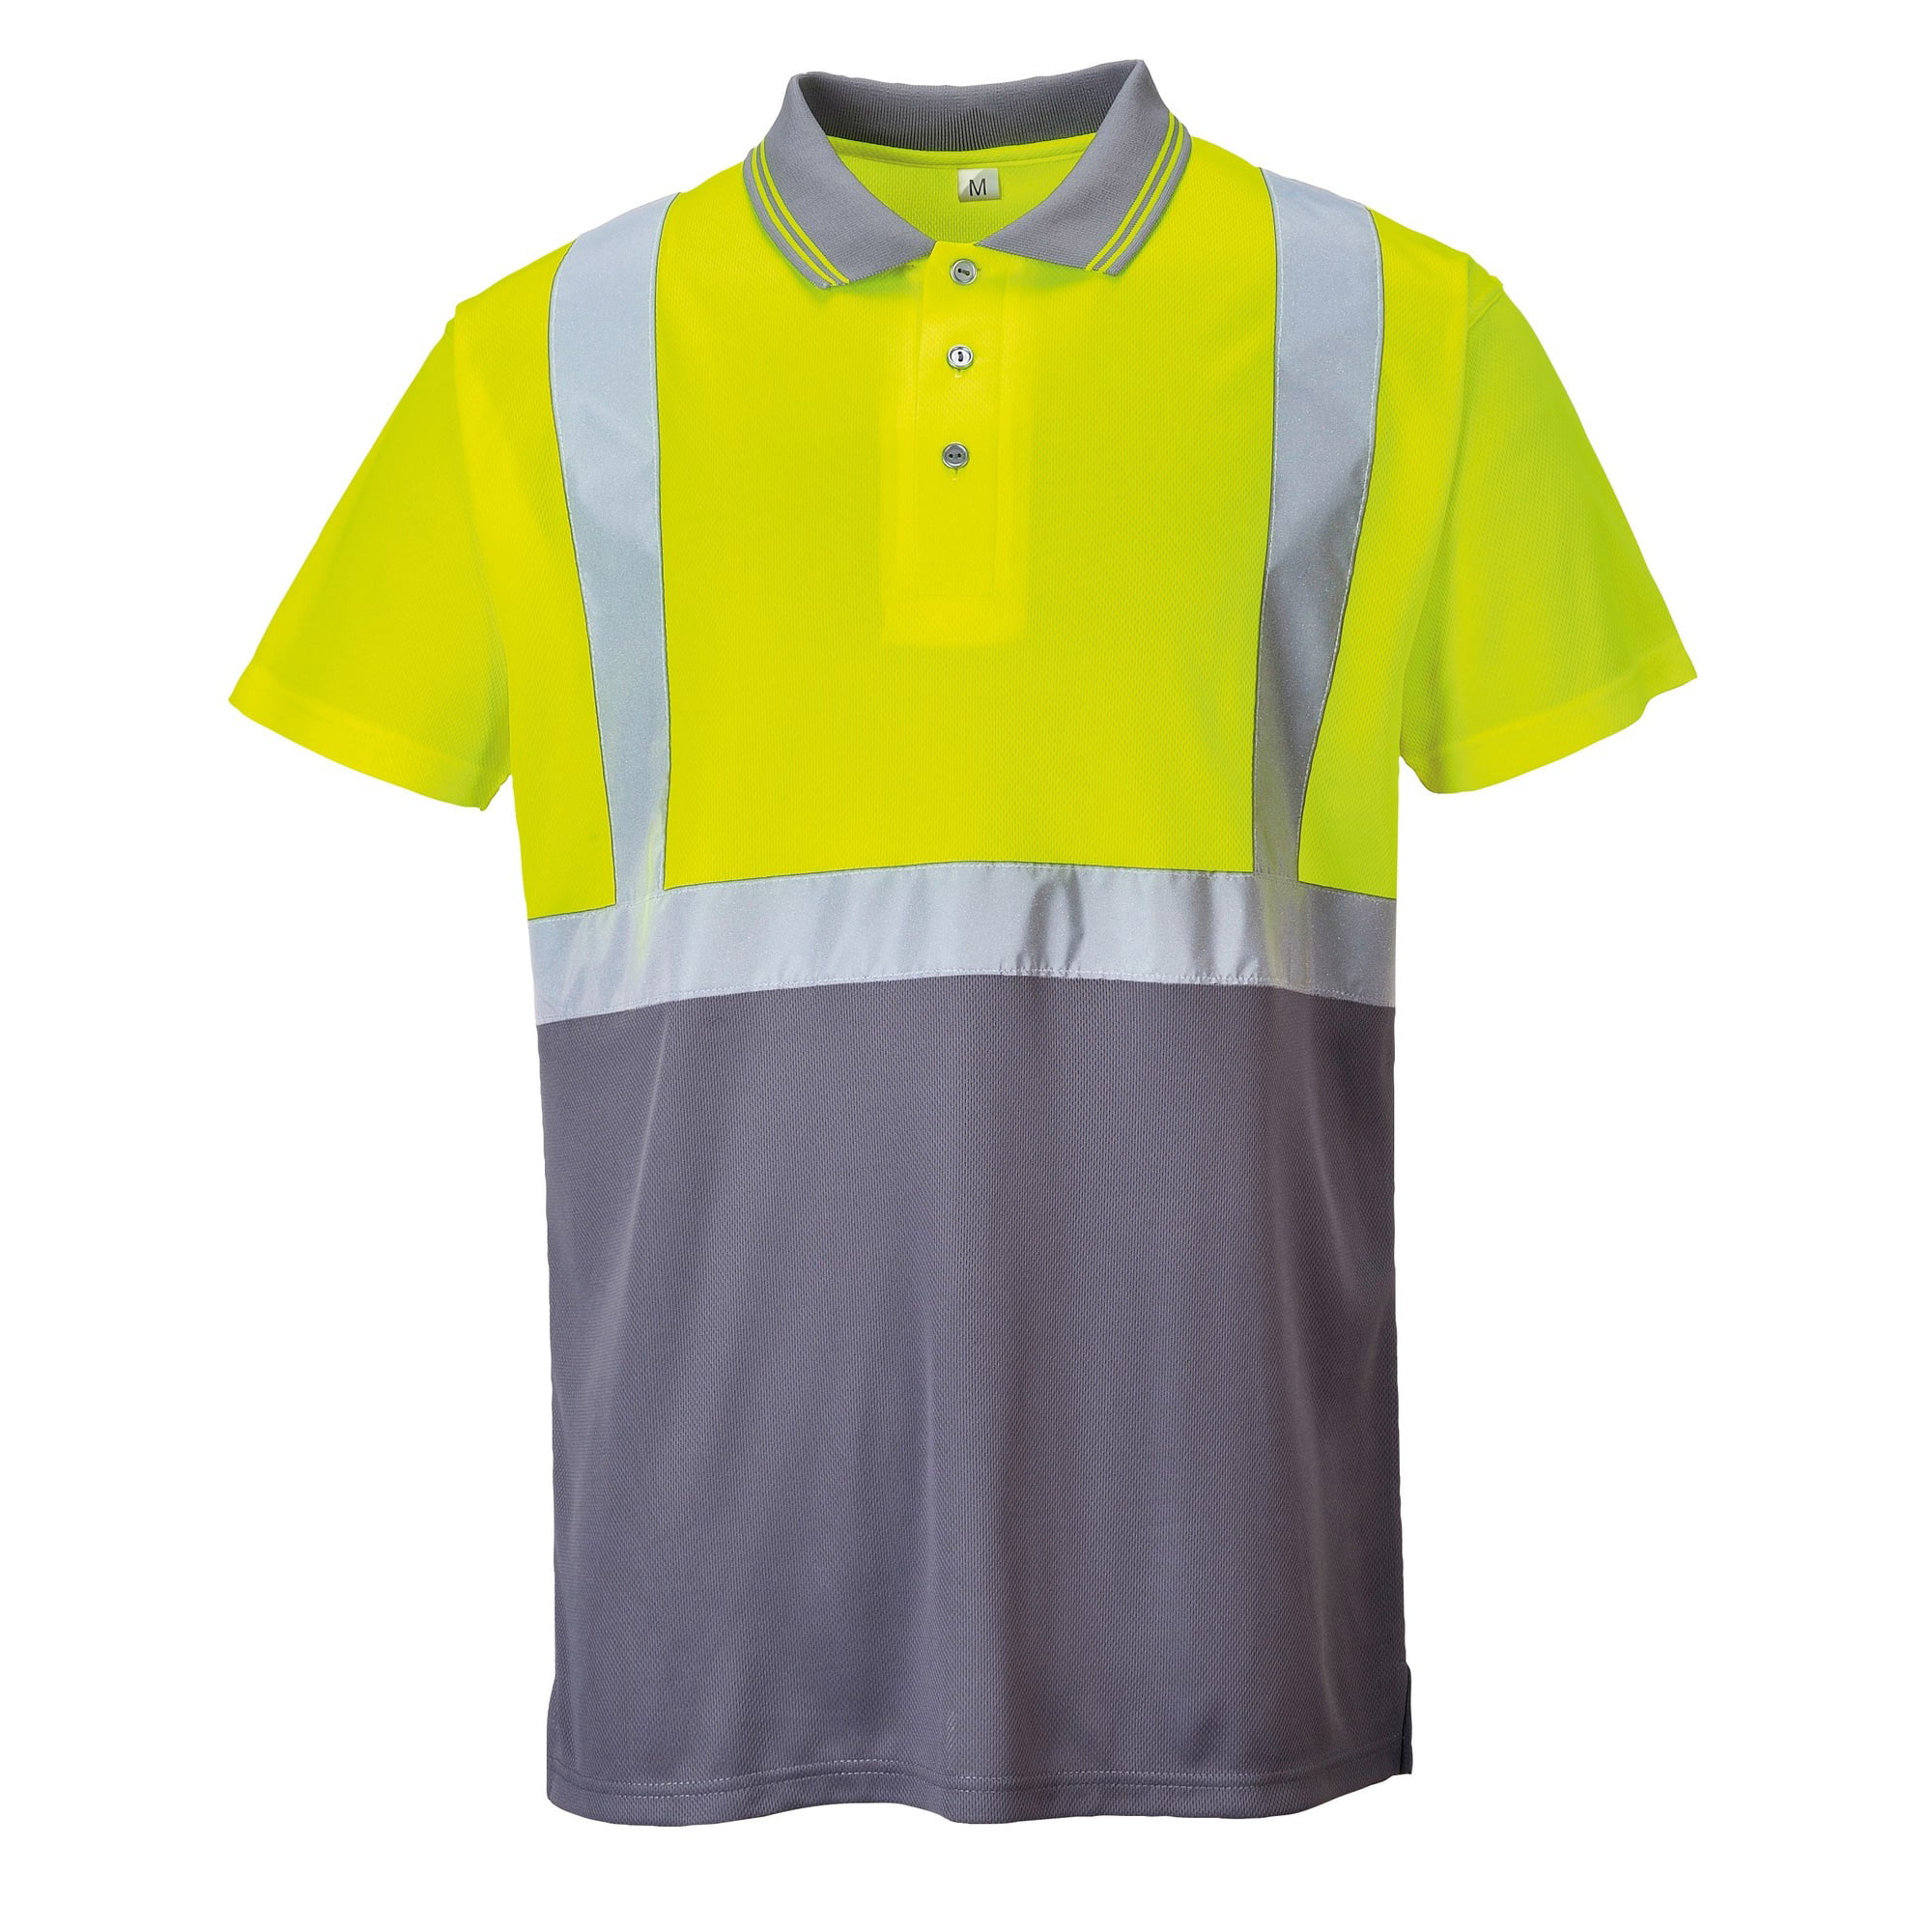 EN ISO 20471 HuntaDeal Hi Viz VIS High Visibility Polo Shirt Reflective Tape Safety Security Work Button T-Shirt Breathable Lightweight Workwear Top Big Size Small to 7XL